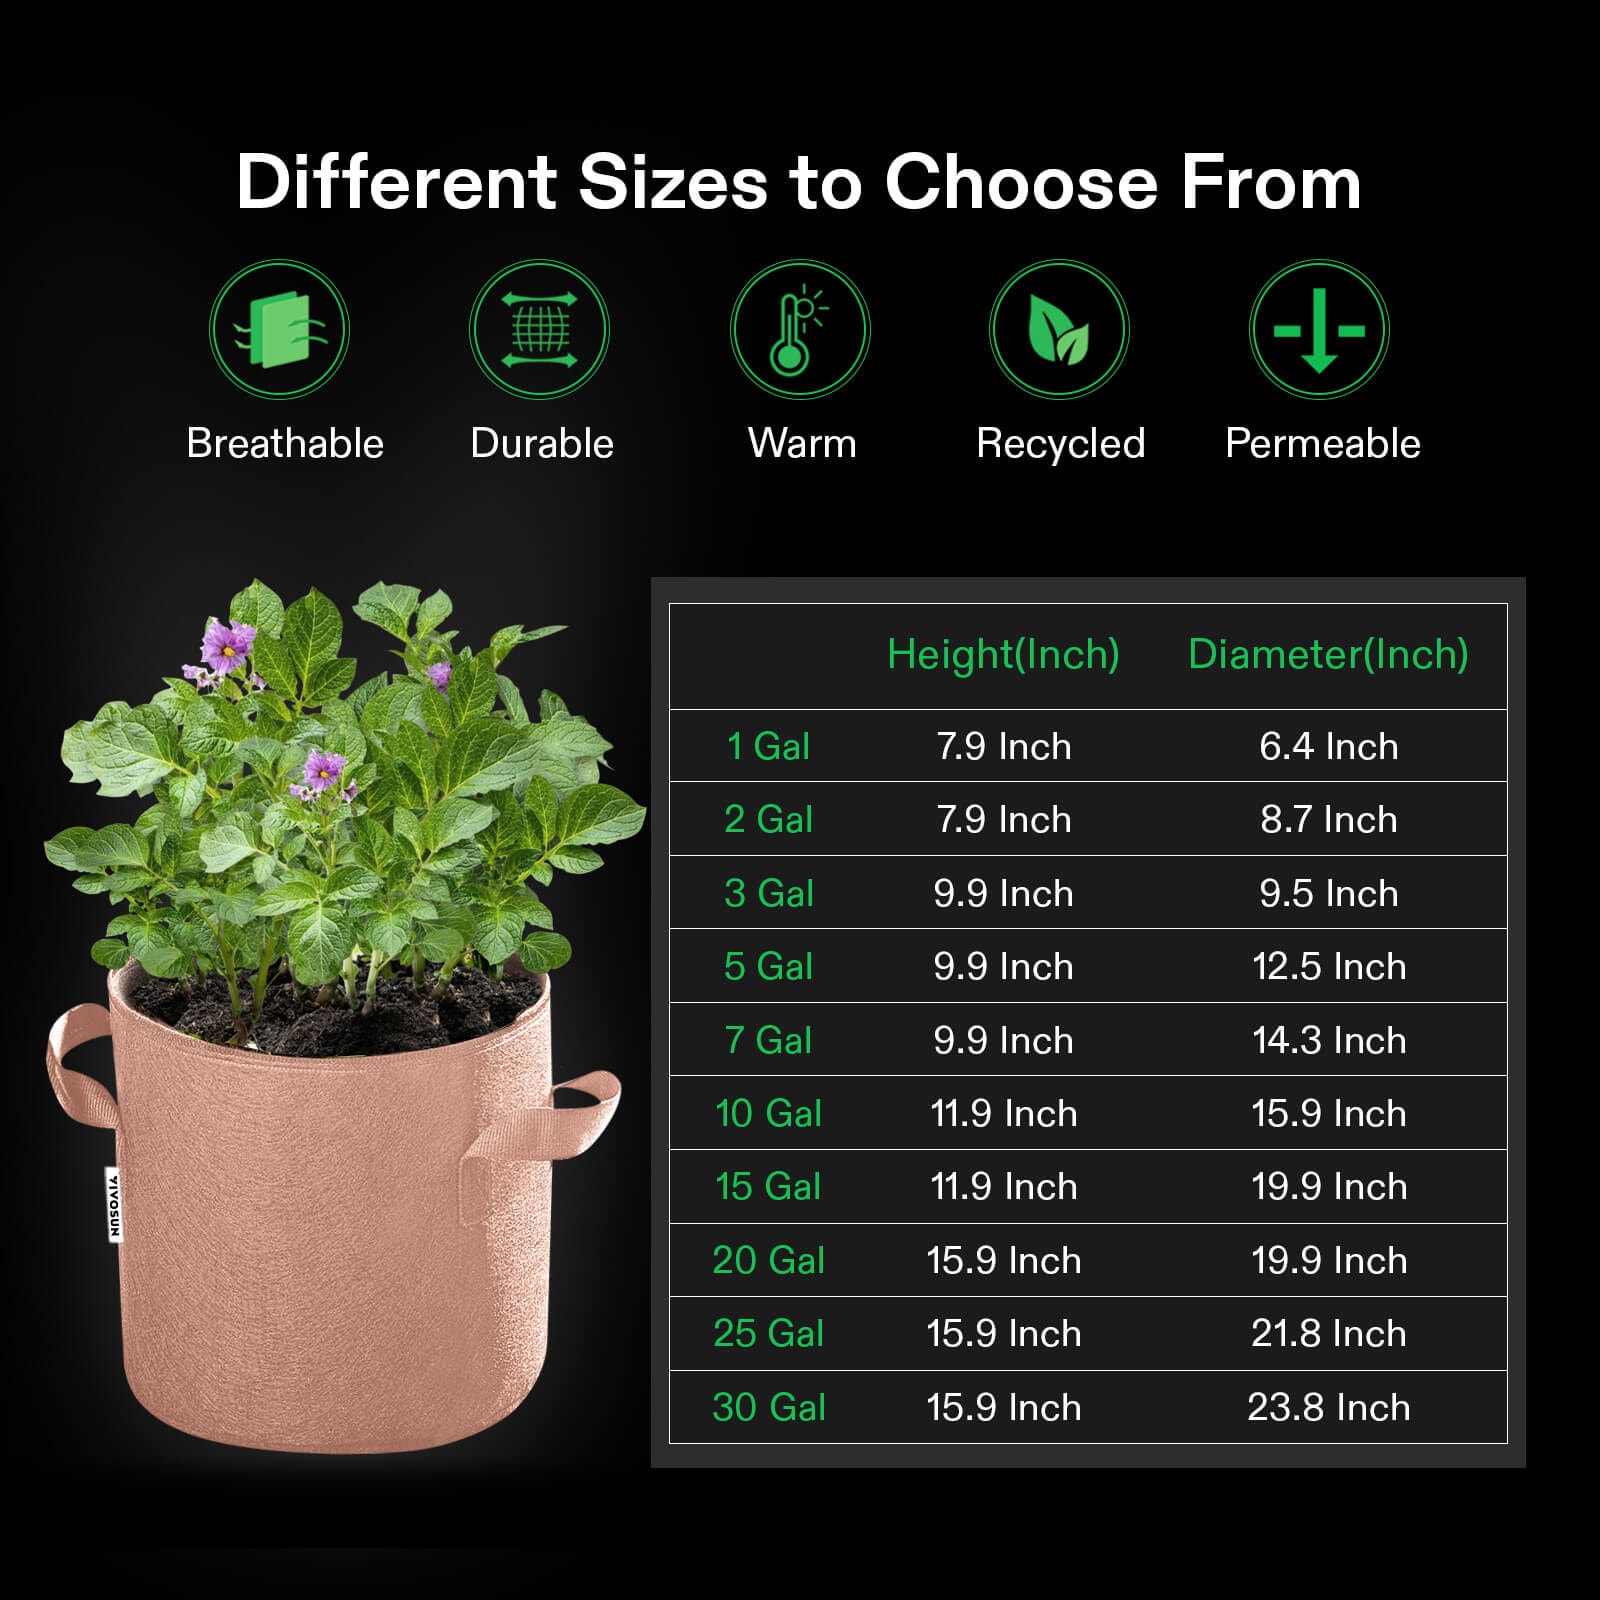 How much can I grow in a 10-gallon Grow Bag?